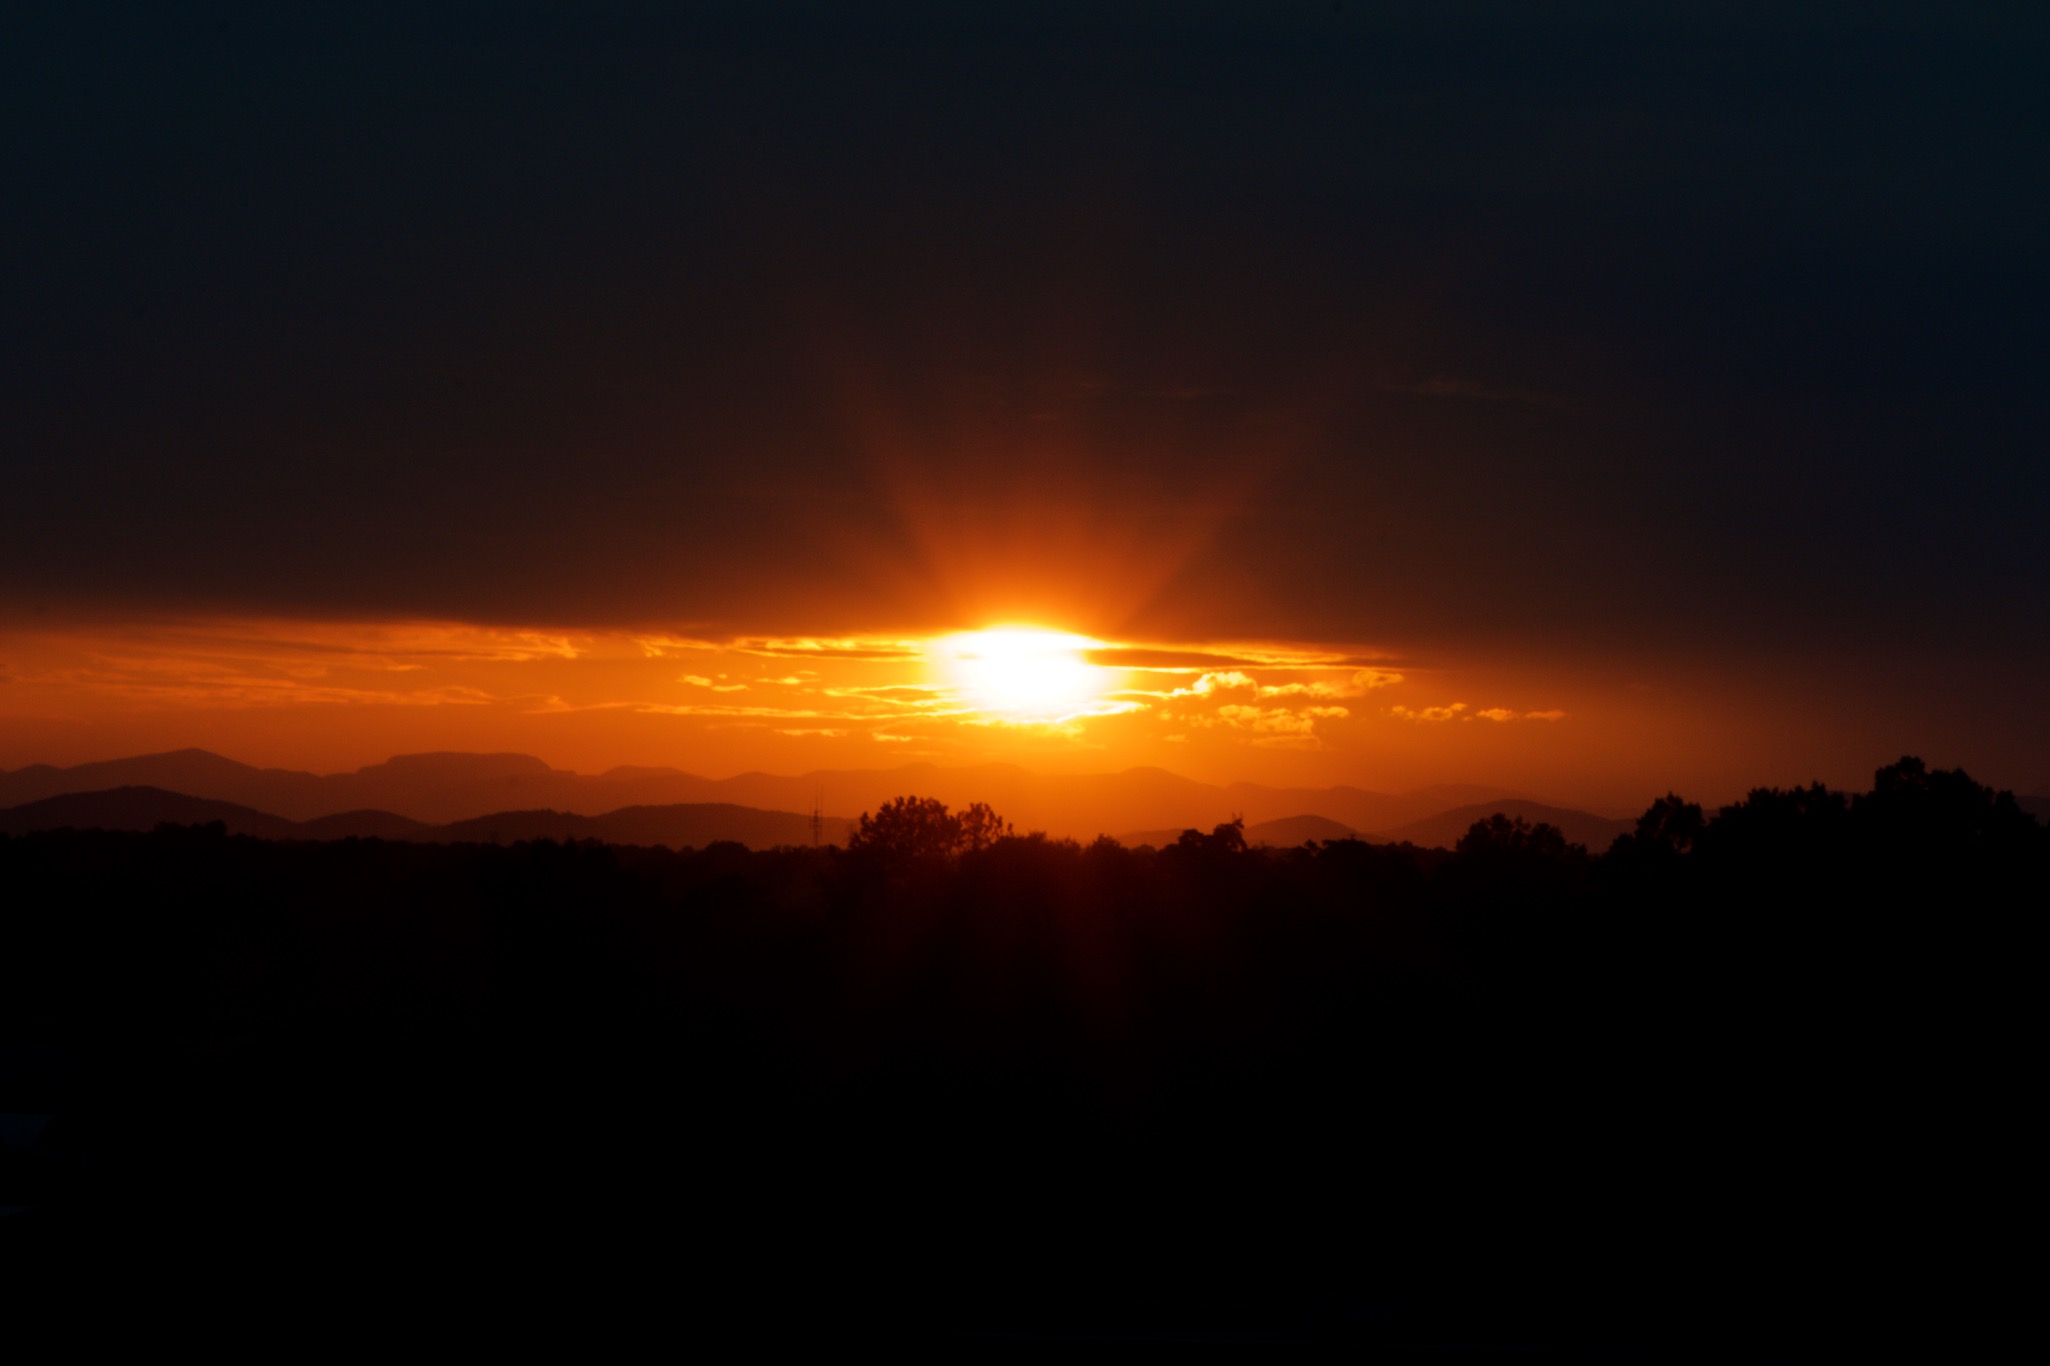 View of the Sunset over the Blue Ridge Mountains from Greenville, South Carolina